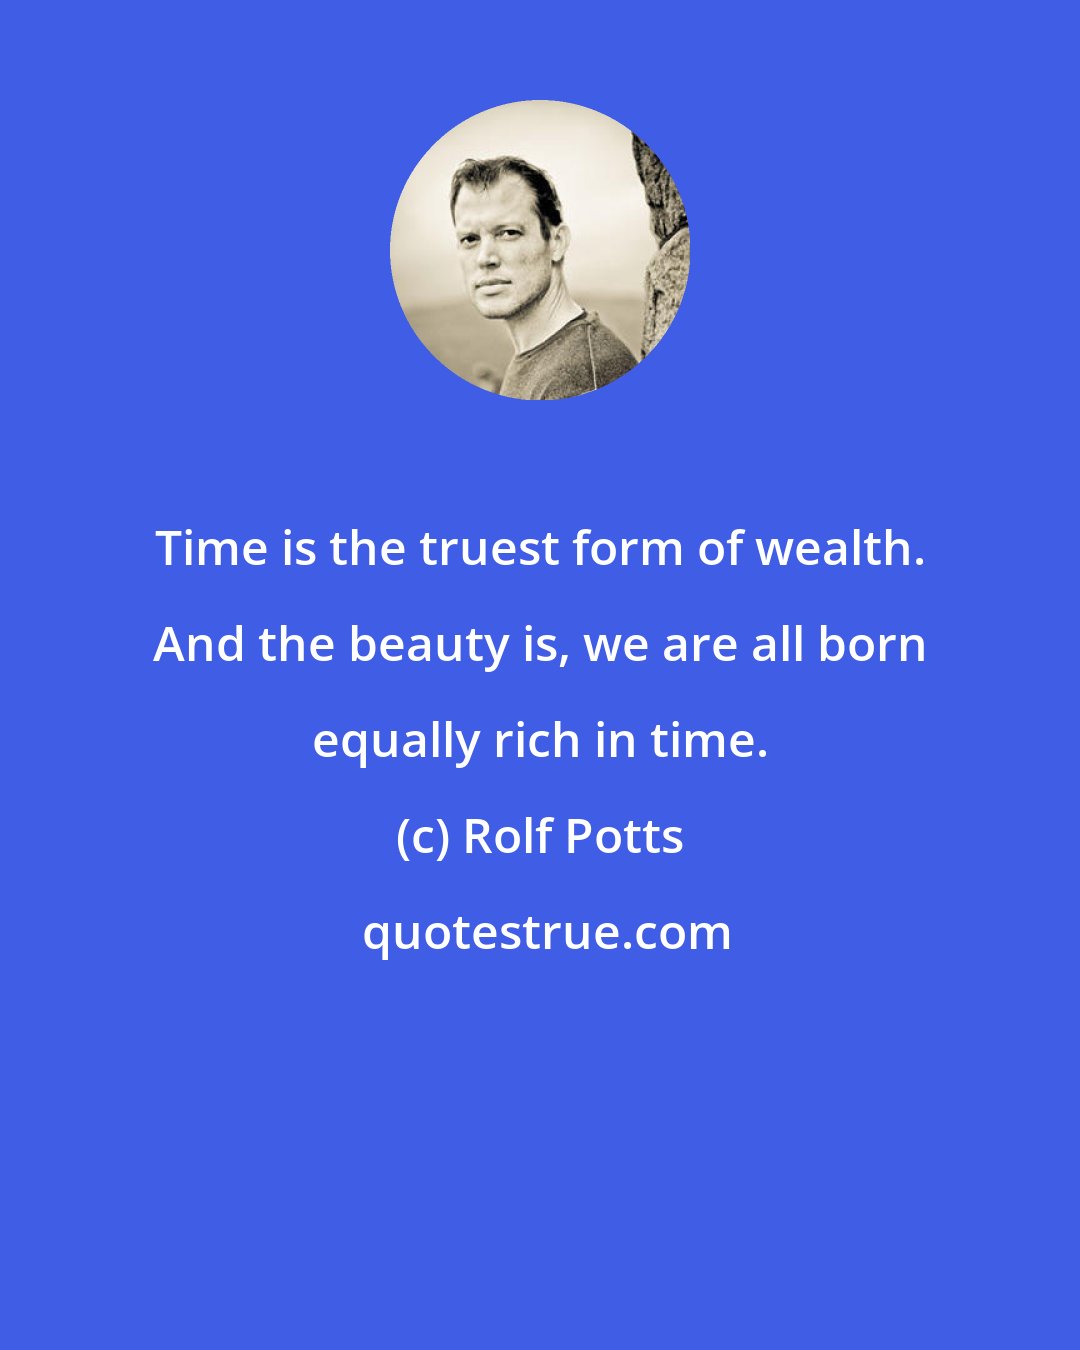 Rolf Potts: Time is the truest form of wealth. And the beauty is, we are all born equally rich in time.